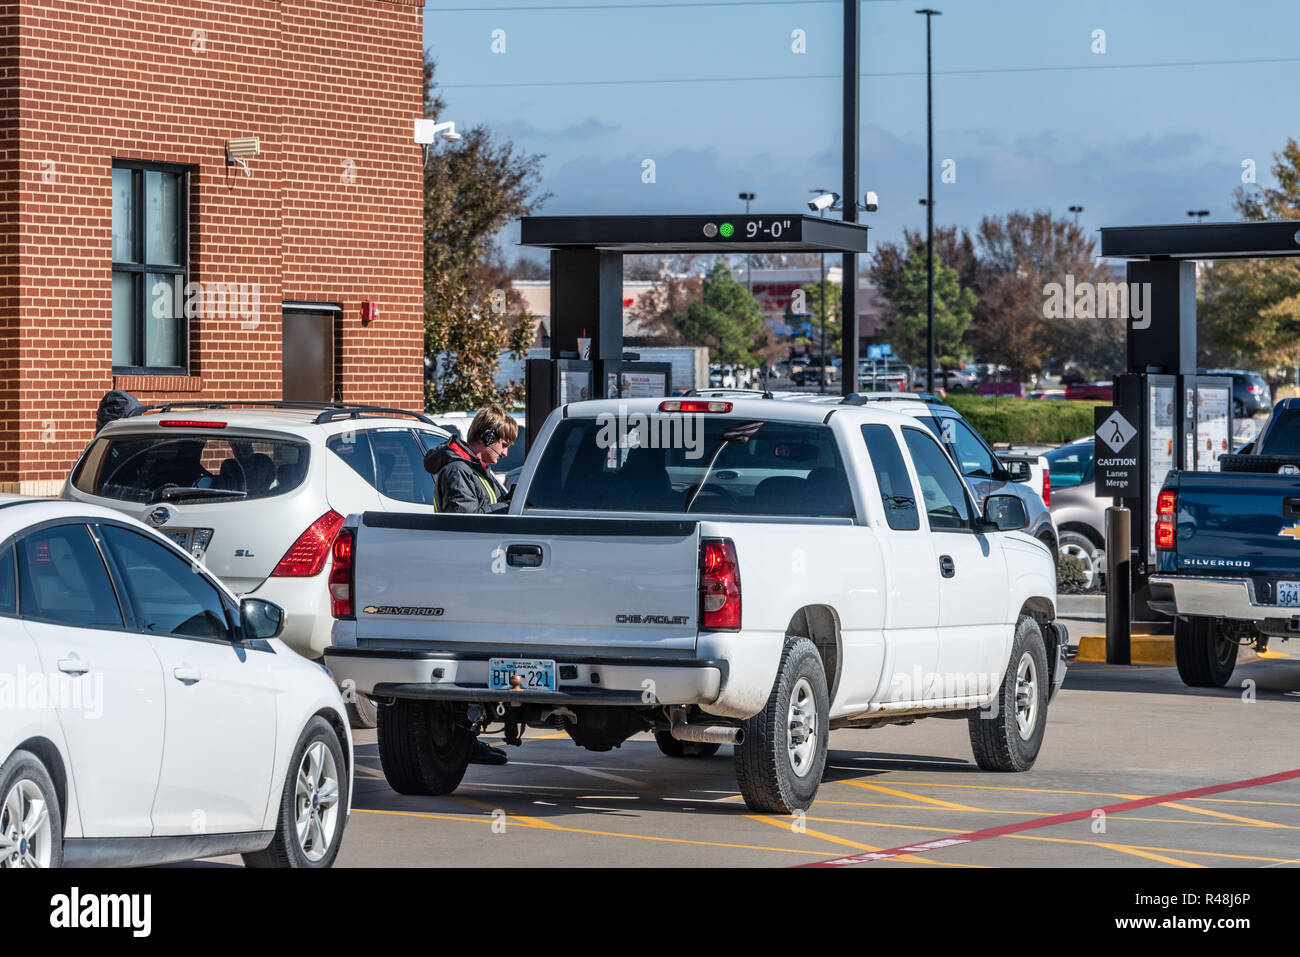 Chick-fil-A employees taking customer orders in double drive-thru lanes at busy Chick-fil-A restaurant in Muskogee, Oklahoma. (USA) Stock Photo